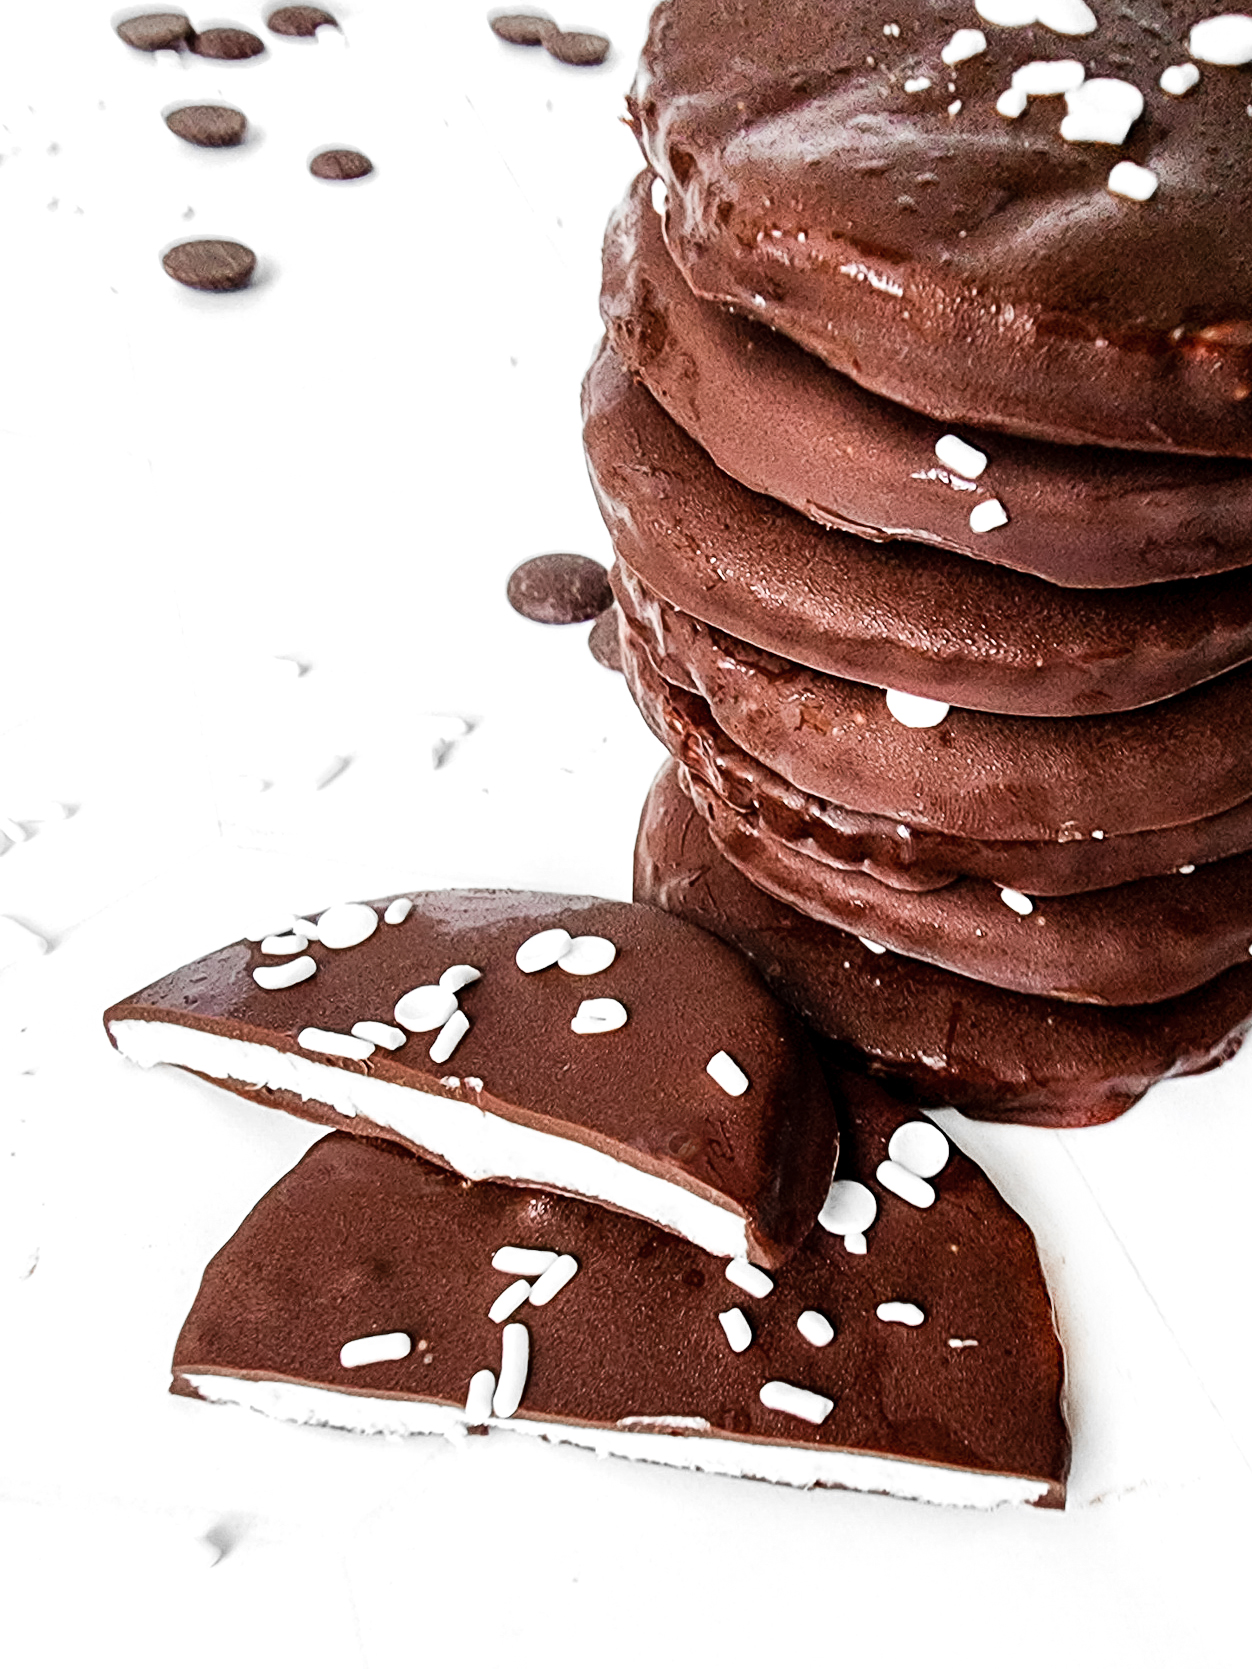 A stack of gluten-free peppermint patties.